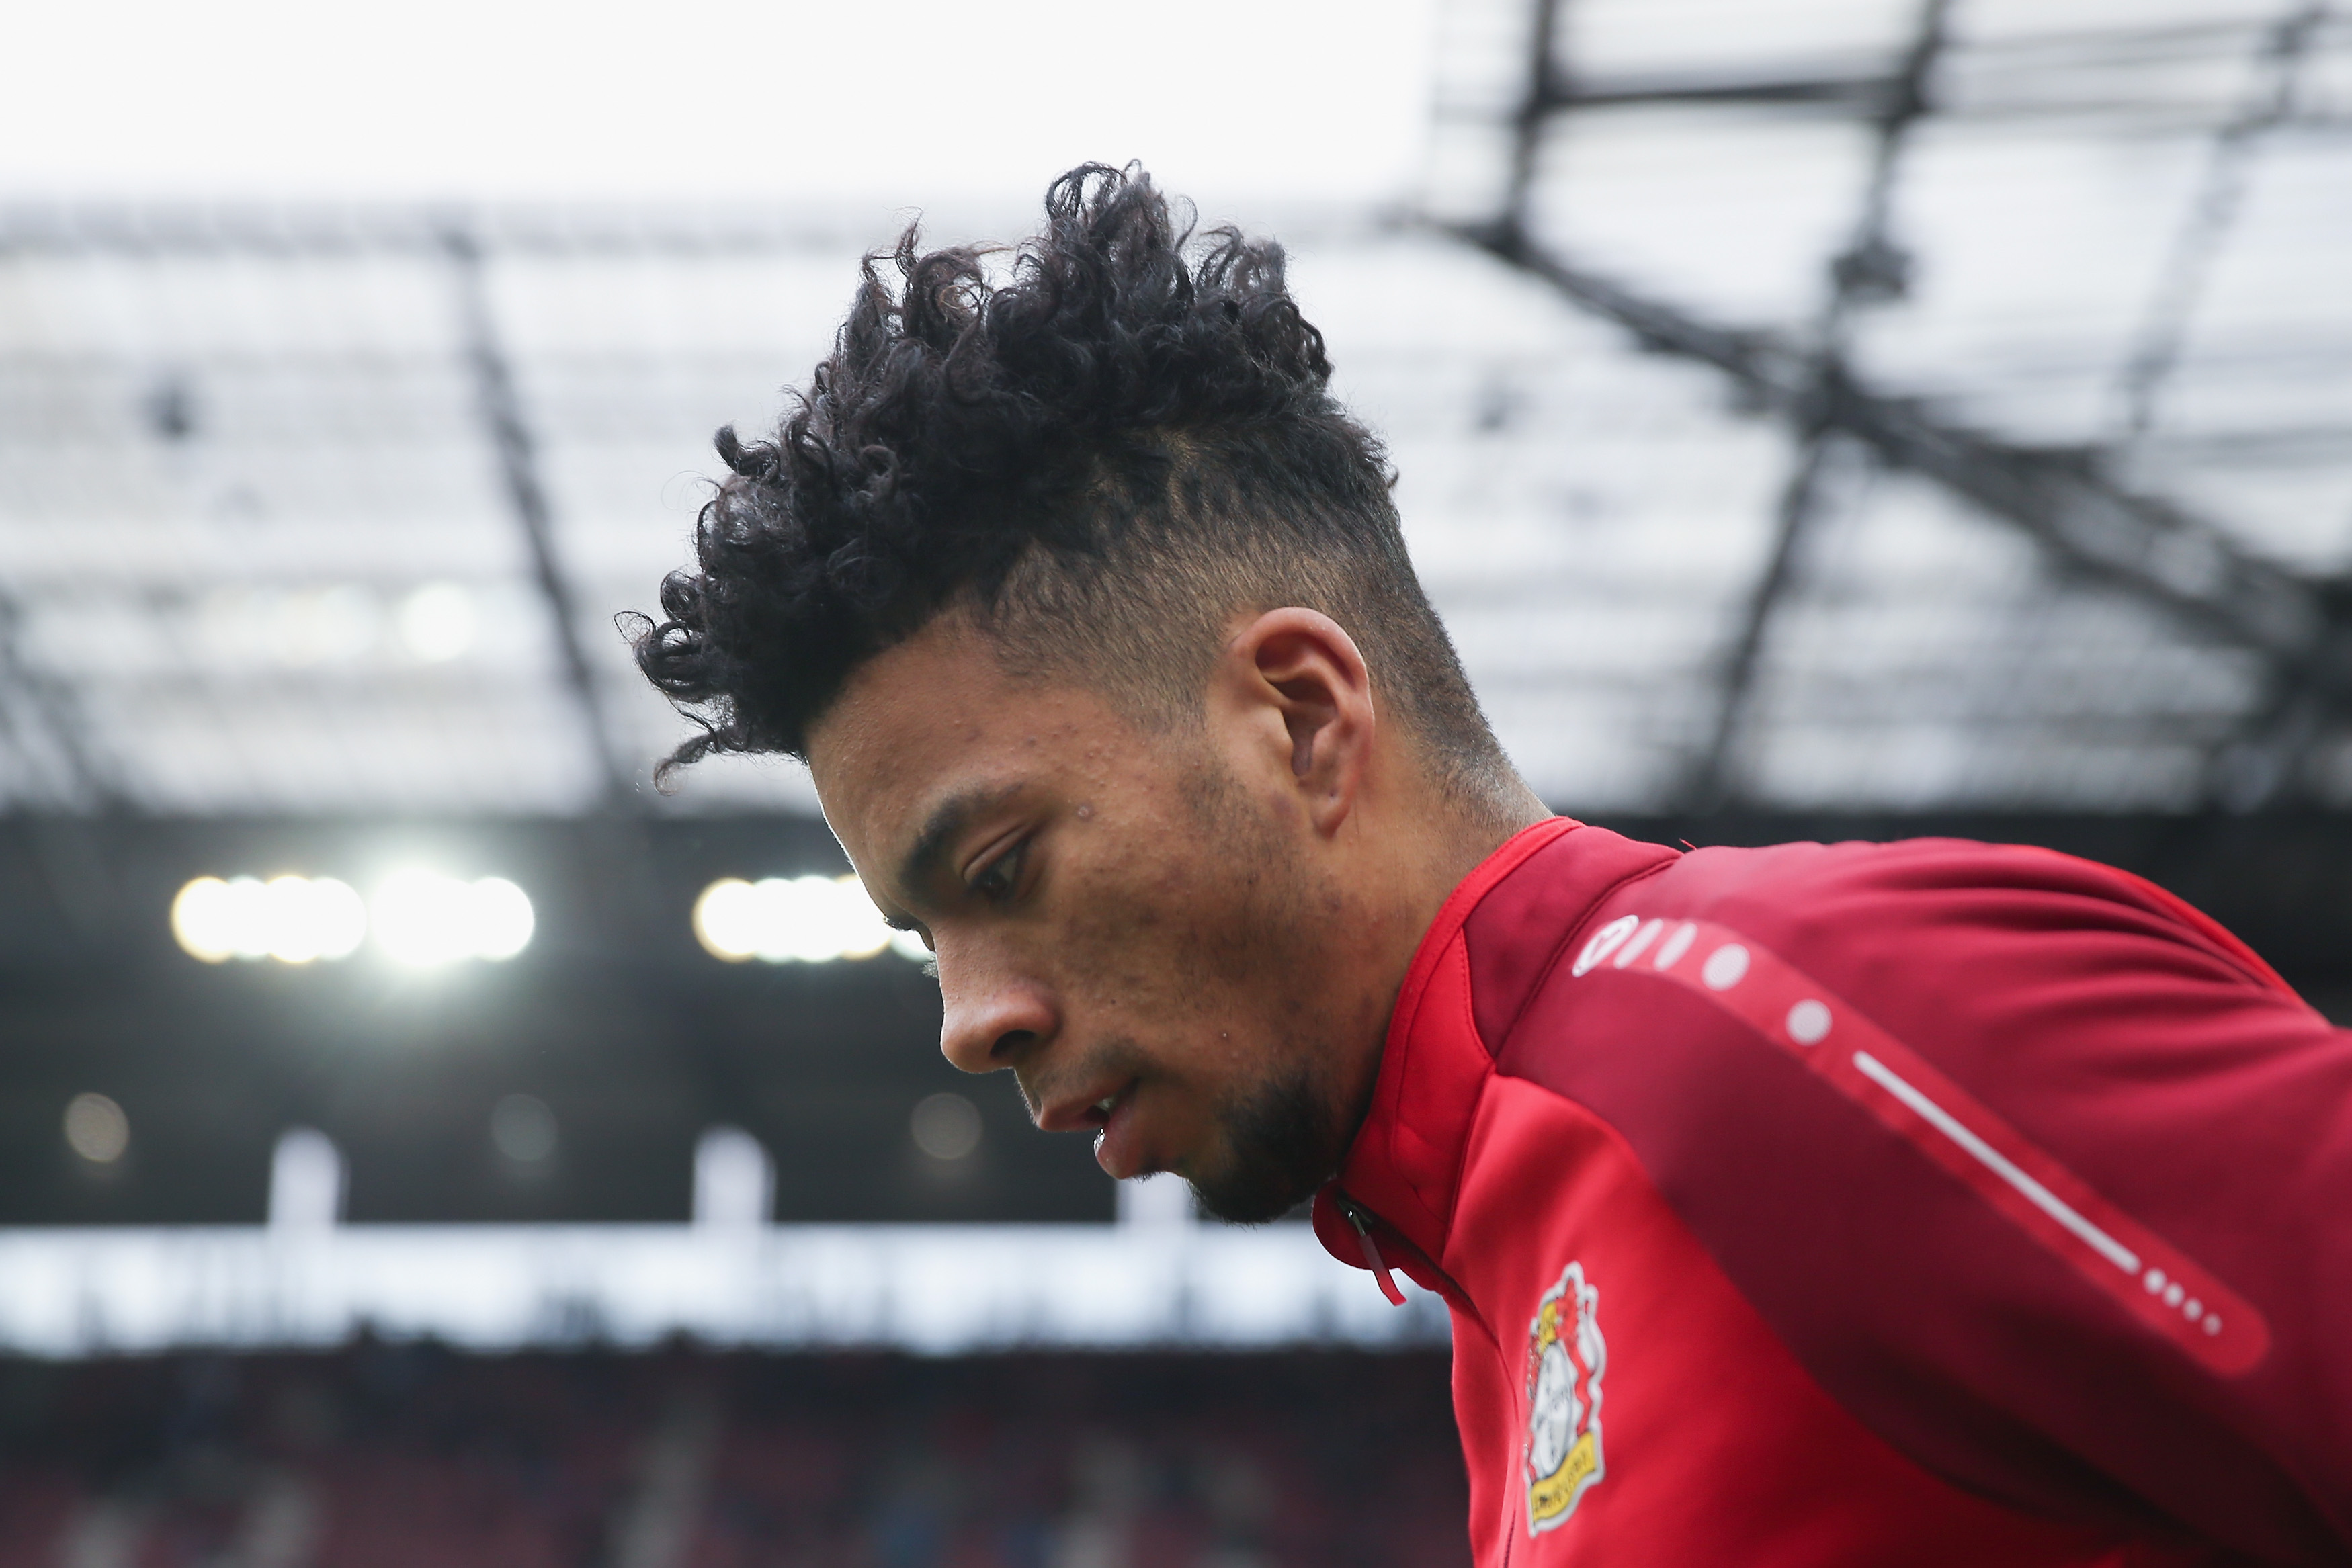 COLOGNE, GERMANY - MARCH 18: Benjamin Henrichs of Leverkusen looks on prior to the Bundesliga match between 1. FC Koeln and Bayer 04 Leverkusen at RheinEnergieStadion on March 18, 2018 in Cologne, Germany.  (Photo by Alex Grimm/Bongarts/Getty Images)